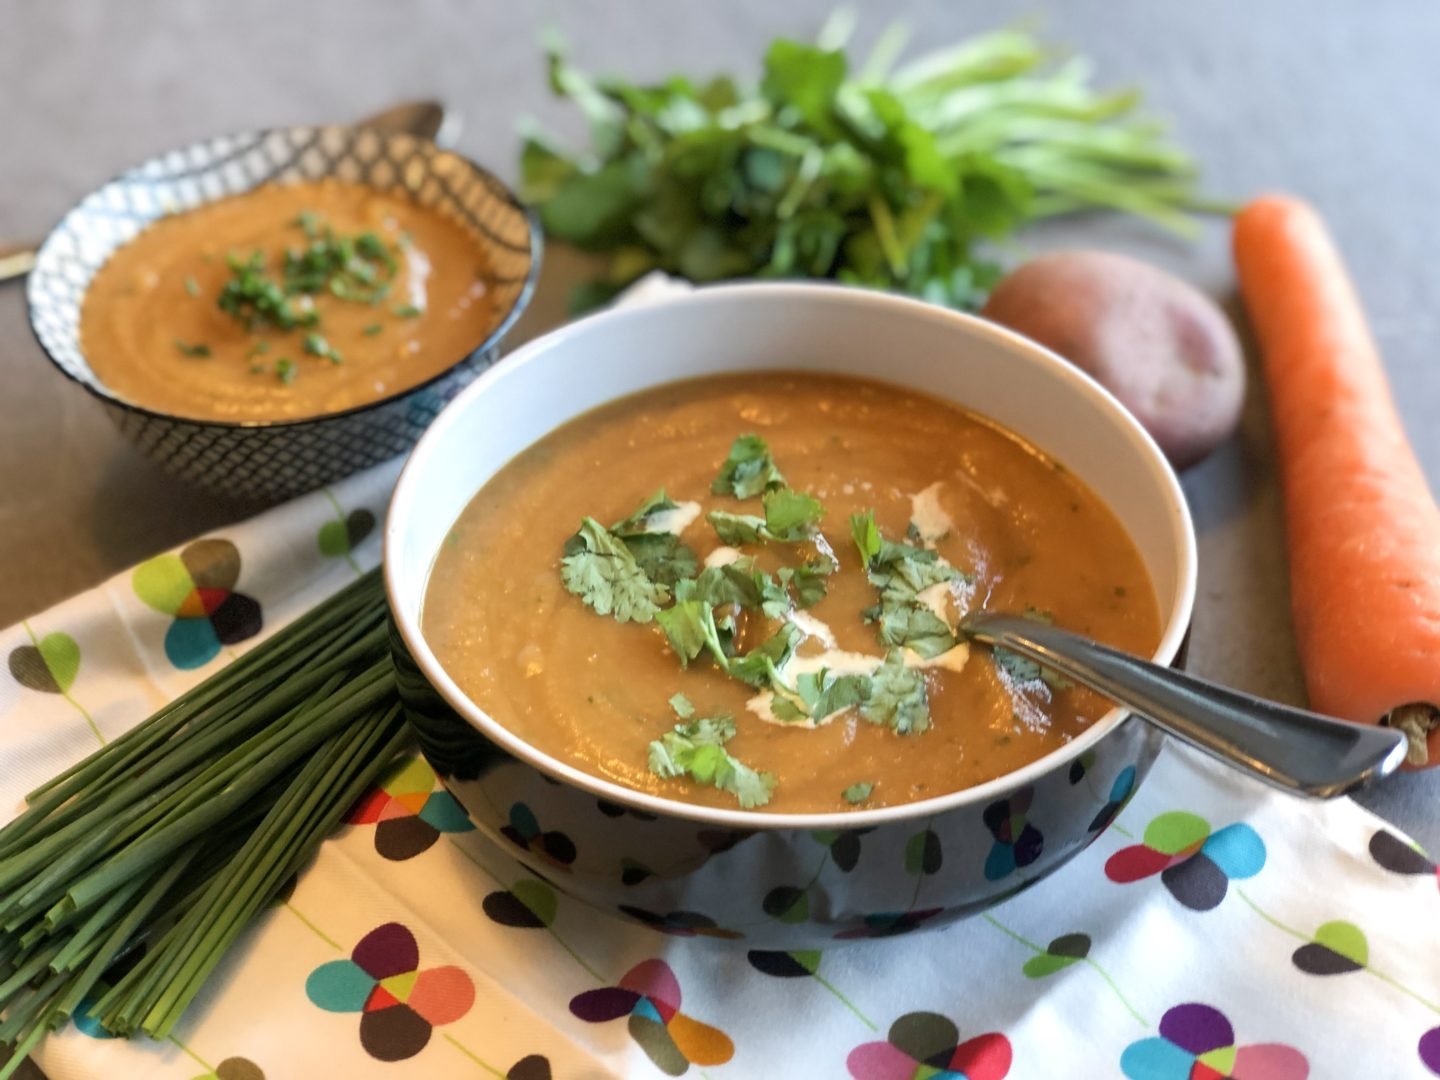 There is nothing I like more in the cold winter months than to make and easy soup. Carrot soup base is really easy and can be achieved in a variety of ways.